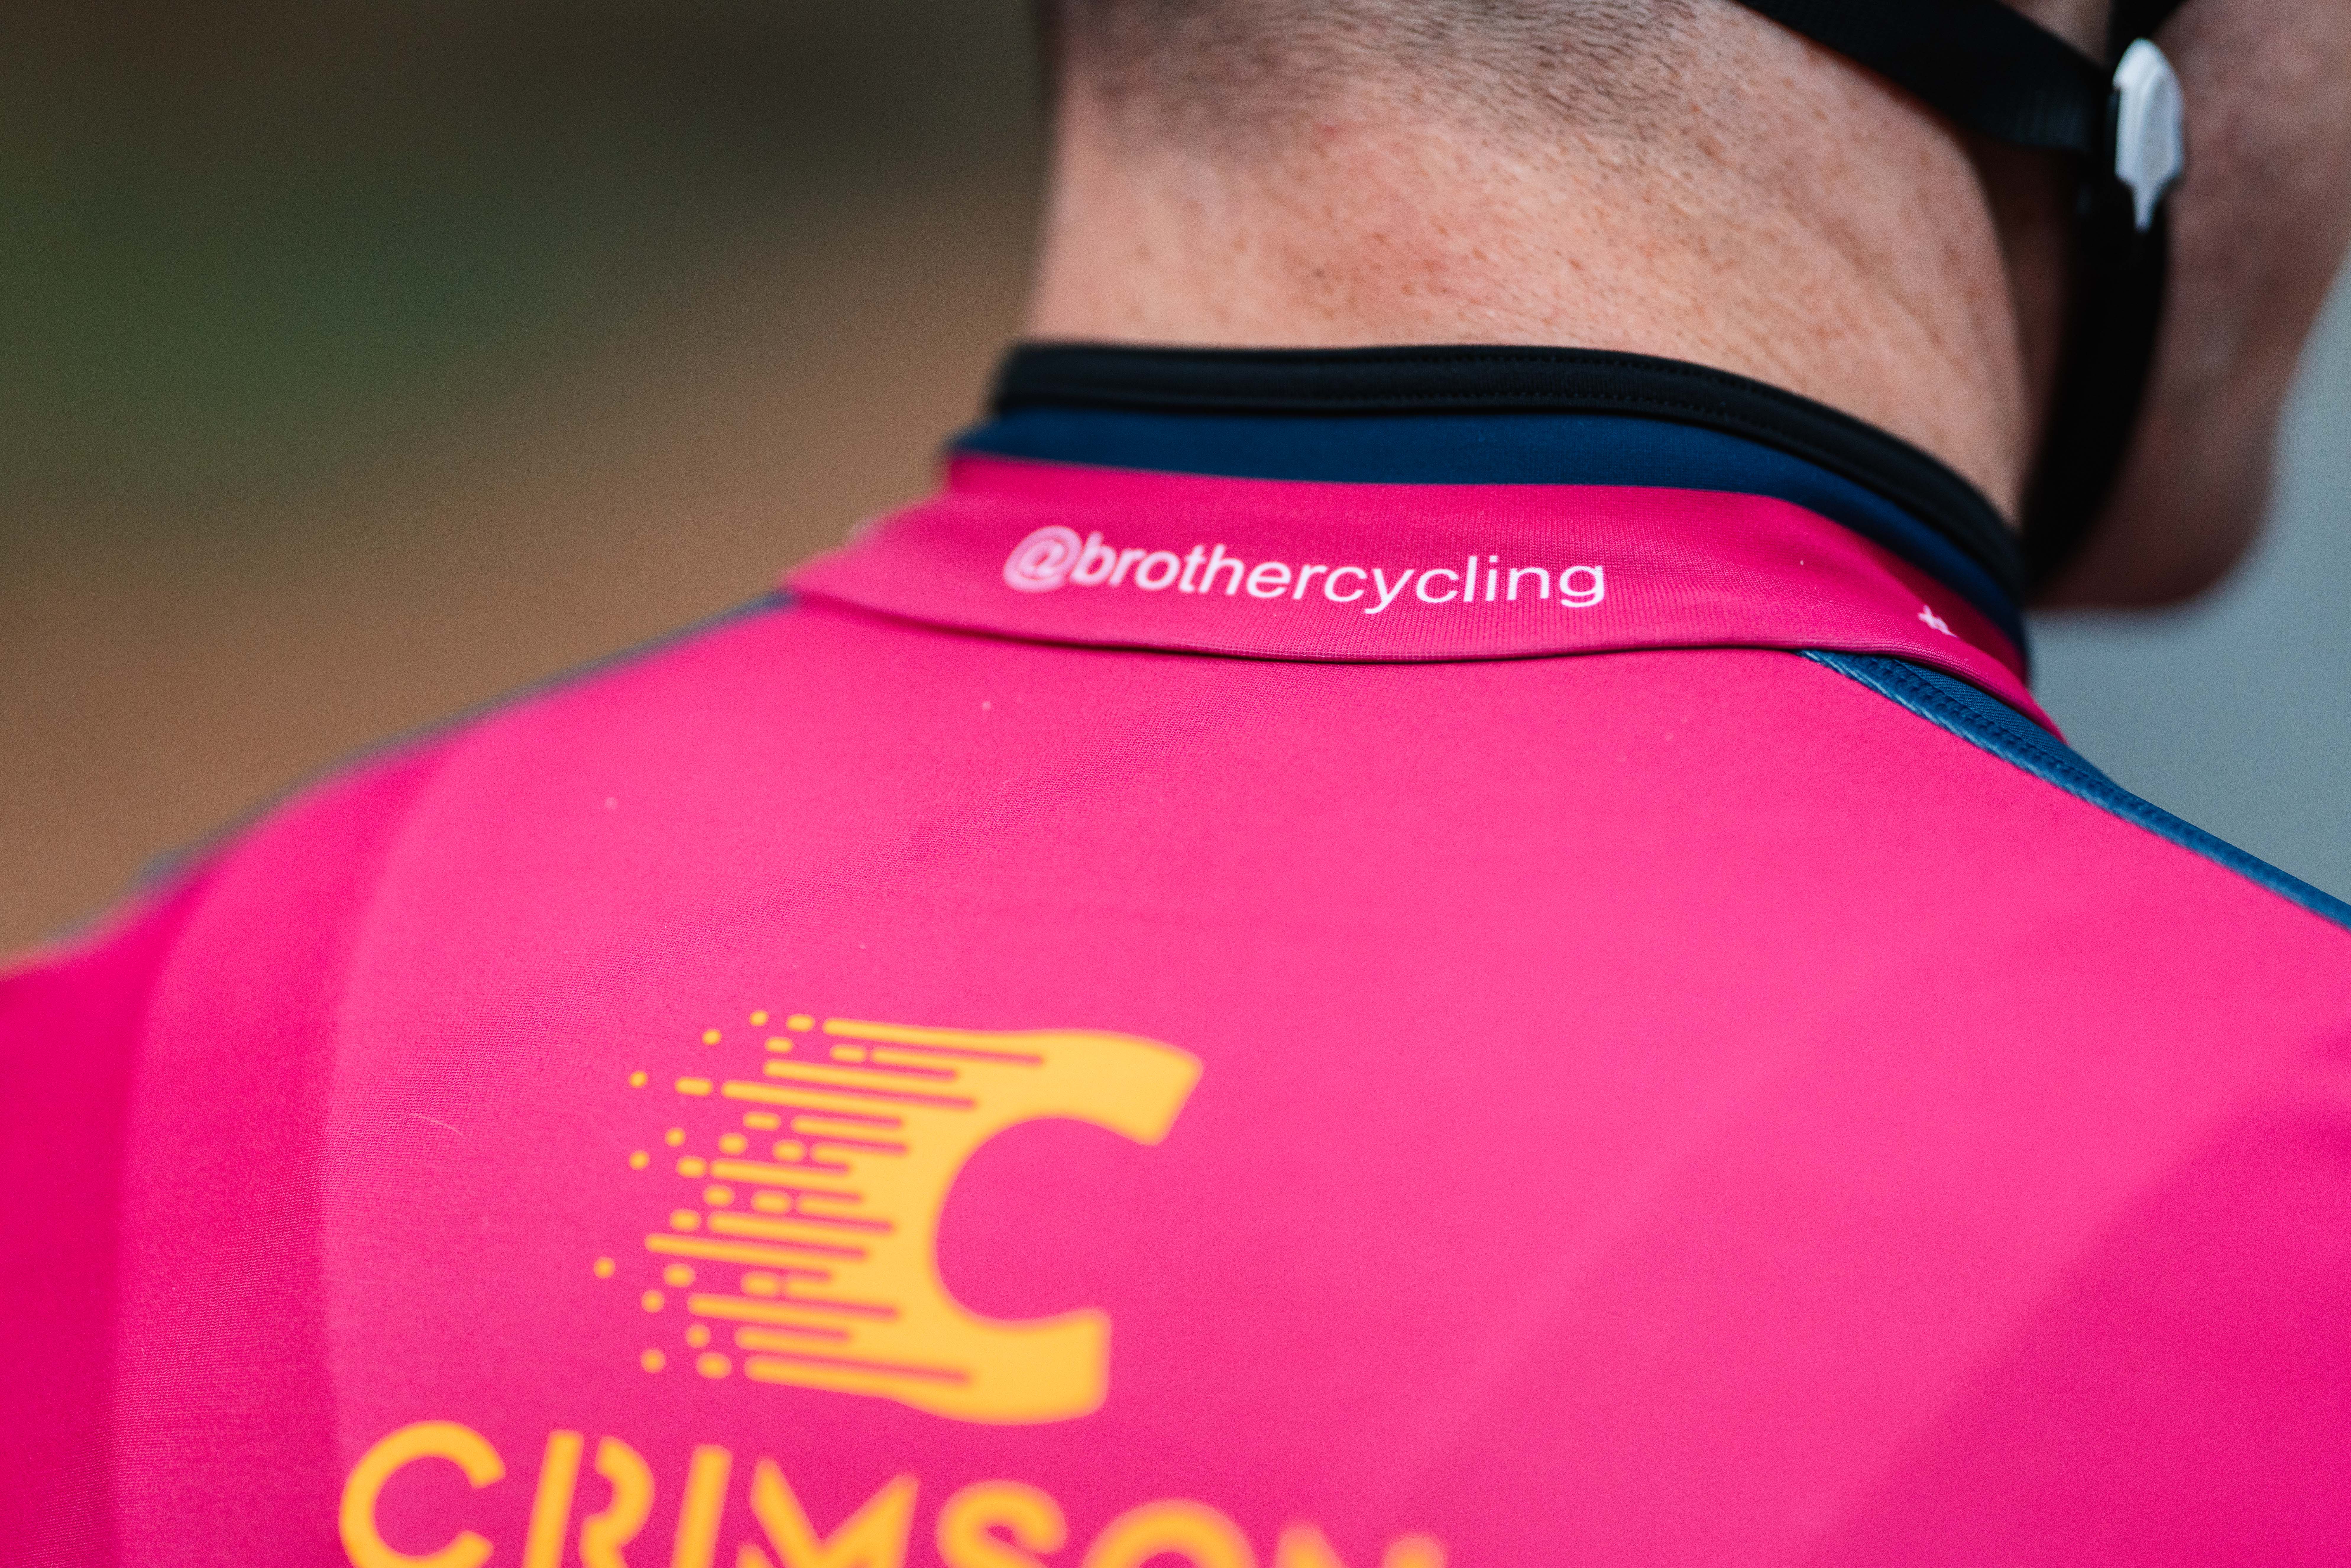 Close up of the @brothercycling handle on a Crimson Performance cycling team jersey